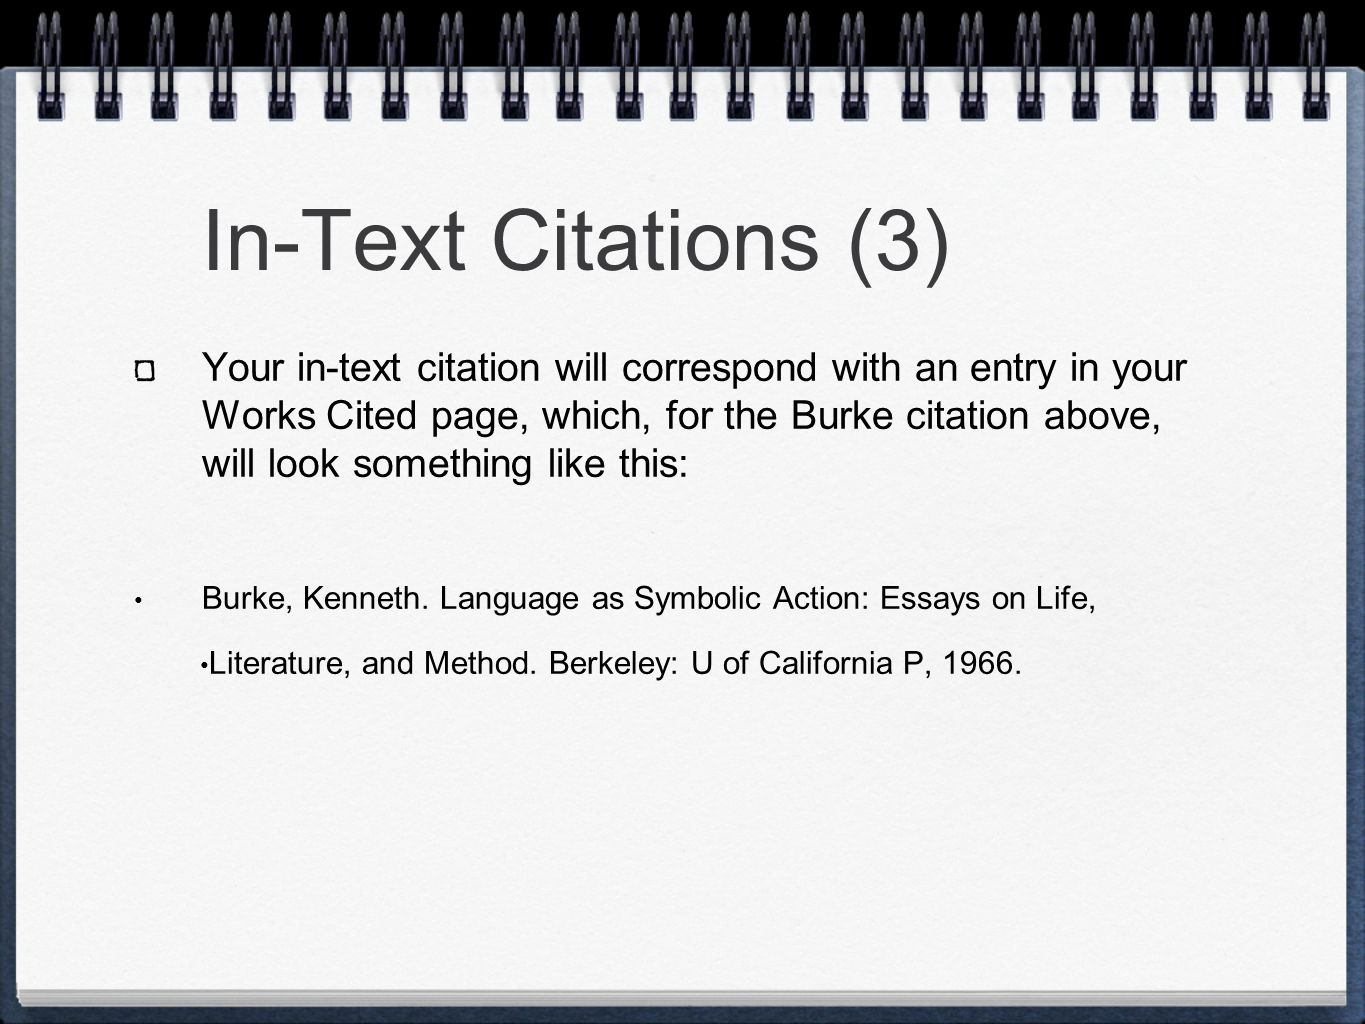 In-Text Citations (3) Your in-text citation will correspond with an entry in your Works Cited page, which, for the Burke citation above, will look something like this: Burke, Kenneth.